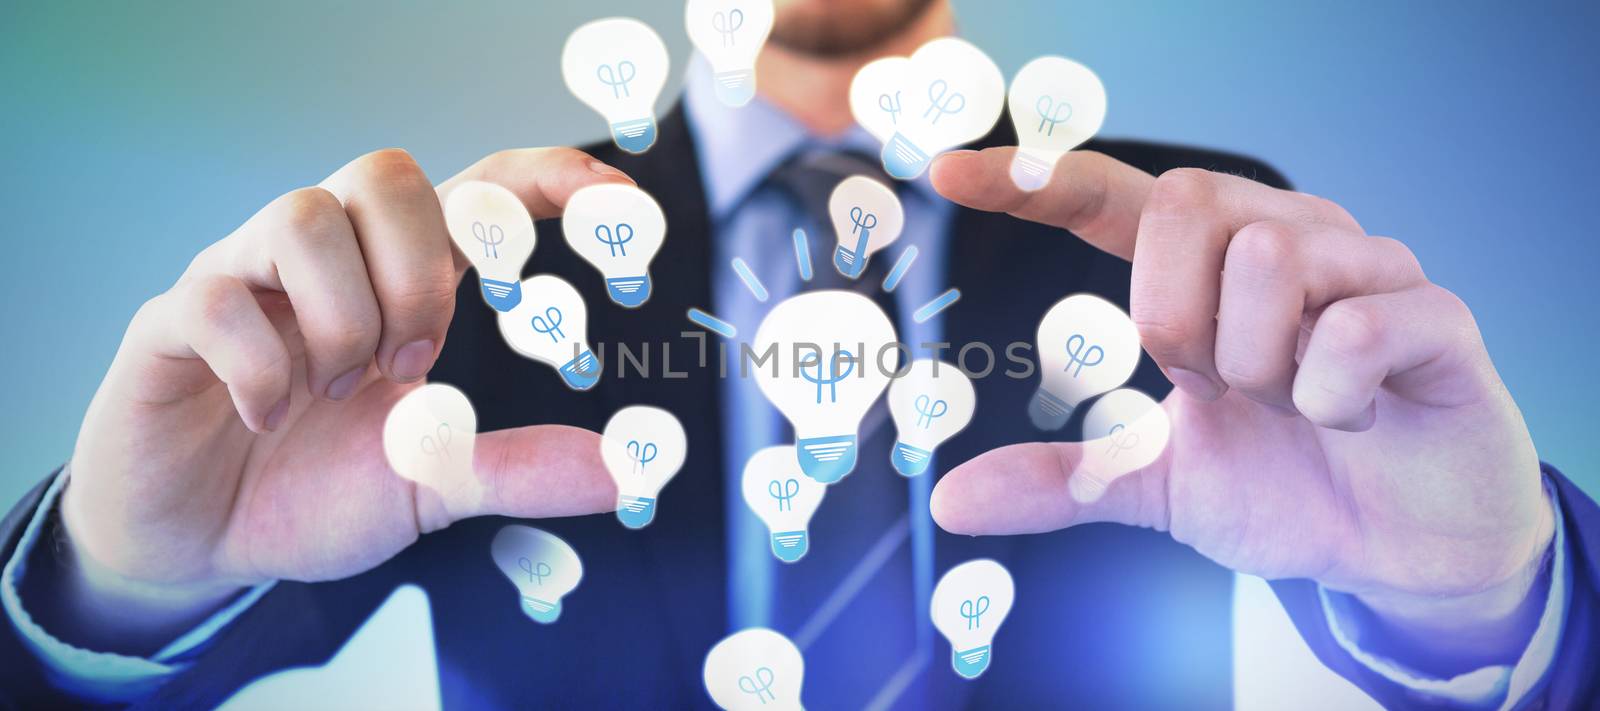 Mid section of businessman wearing suit while advertising invisible product against abstract blue background